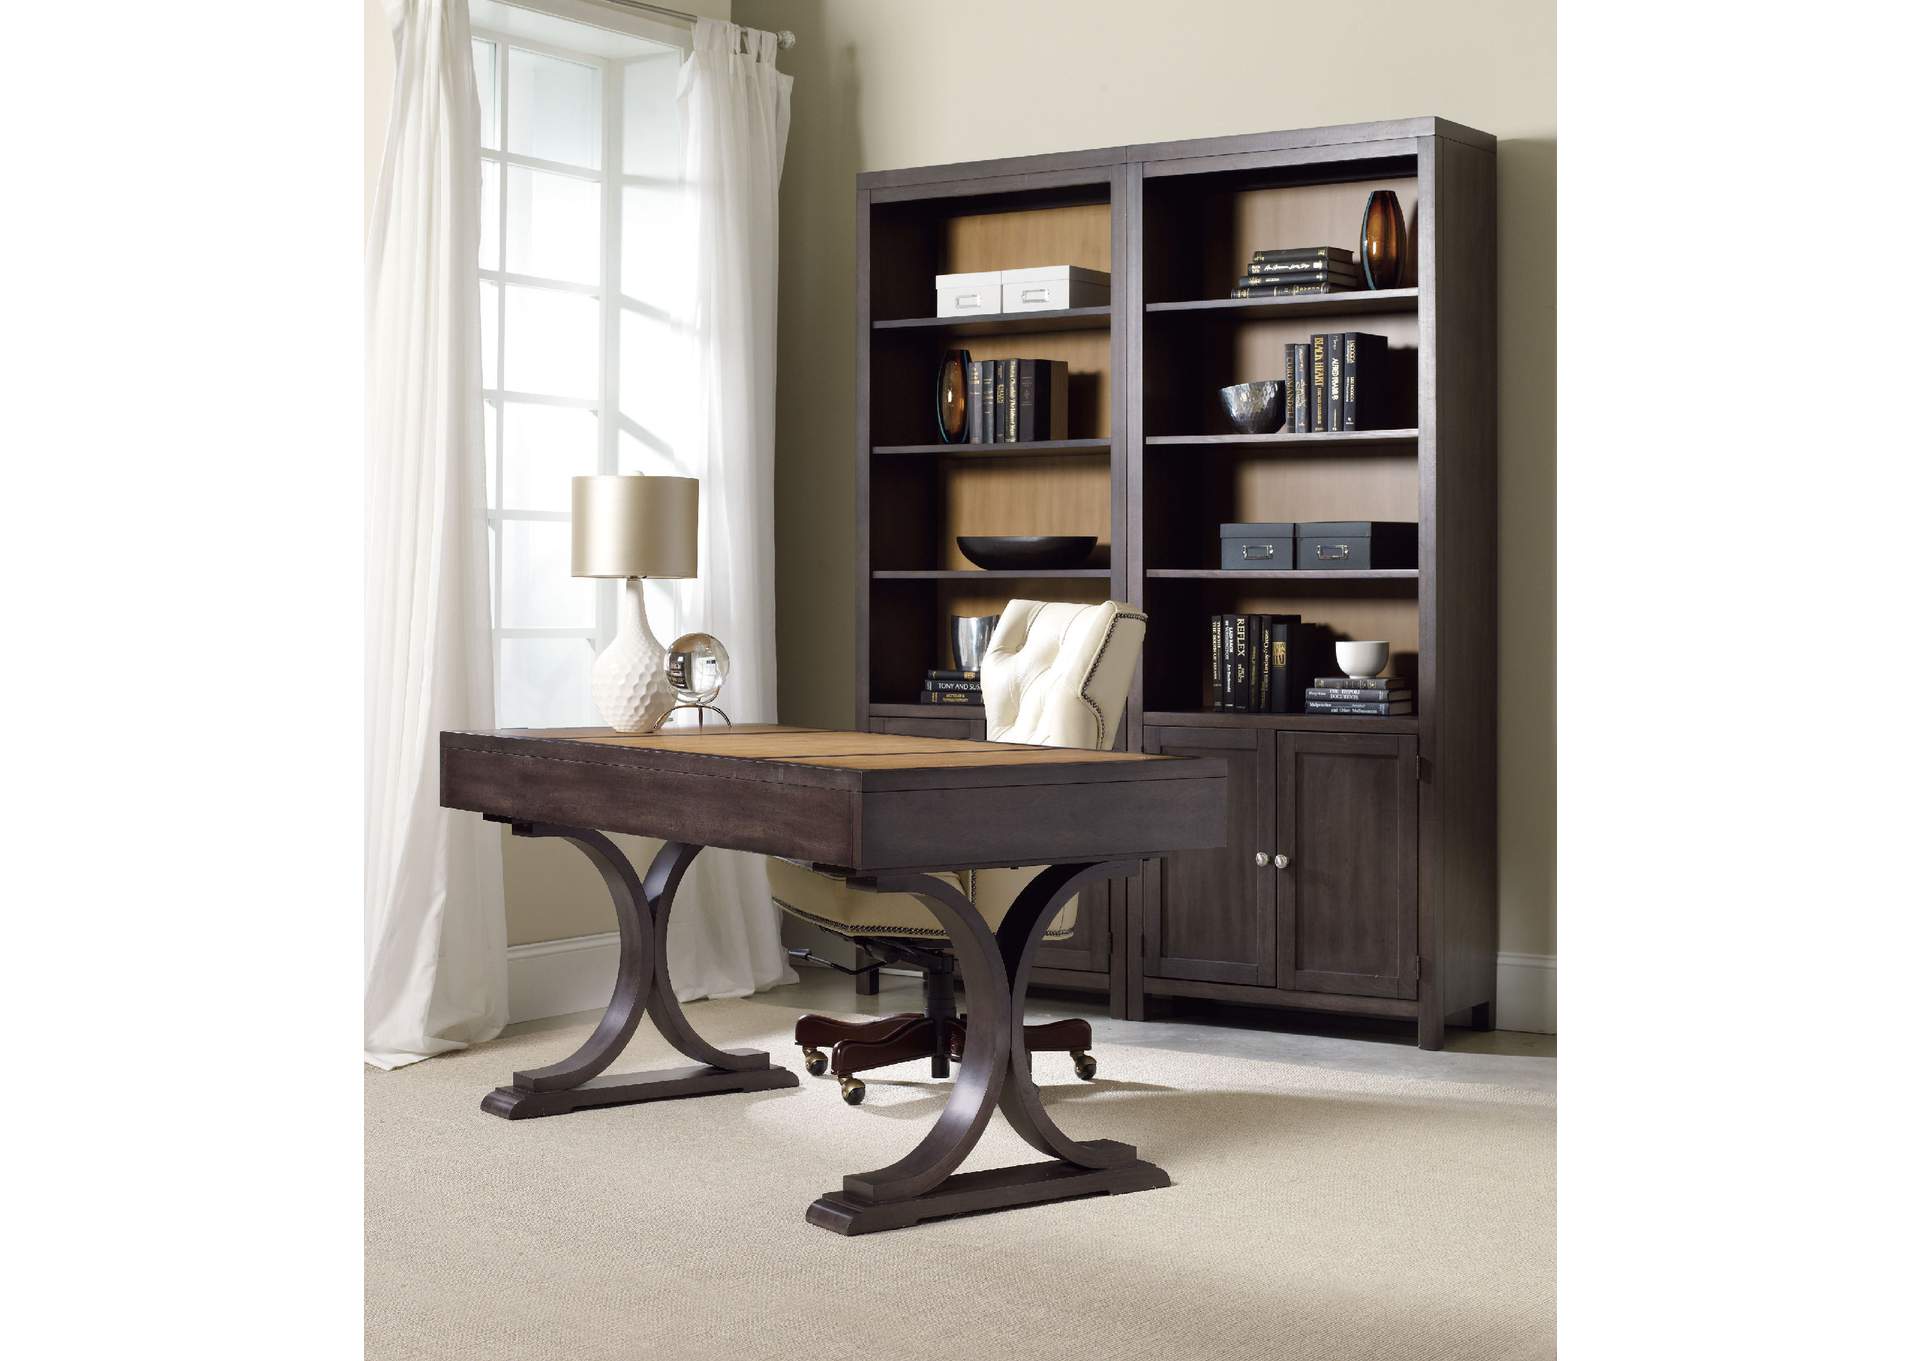 South Park Bunching Bookcase,Hooker Furniture